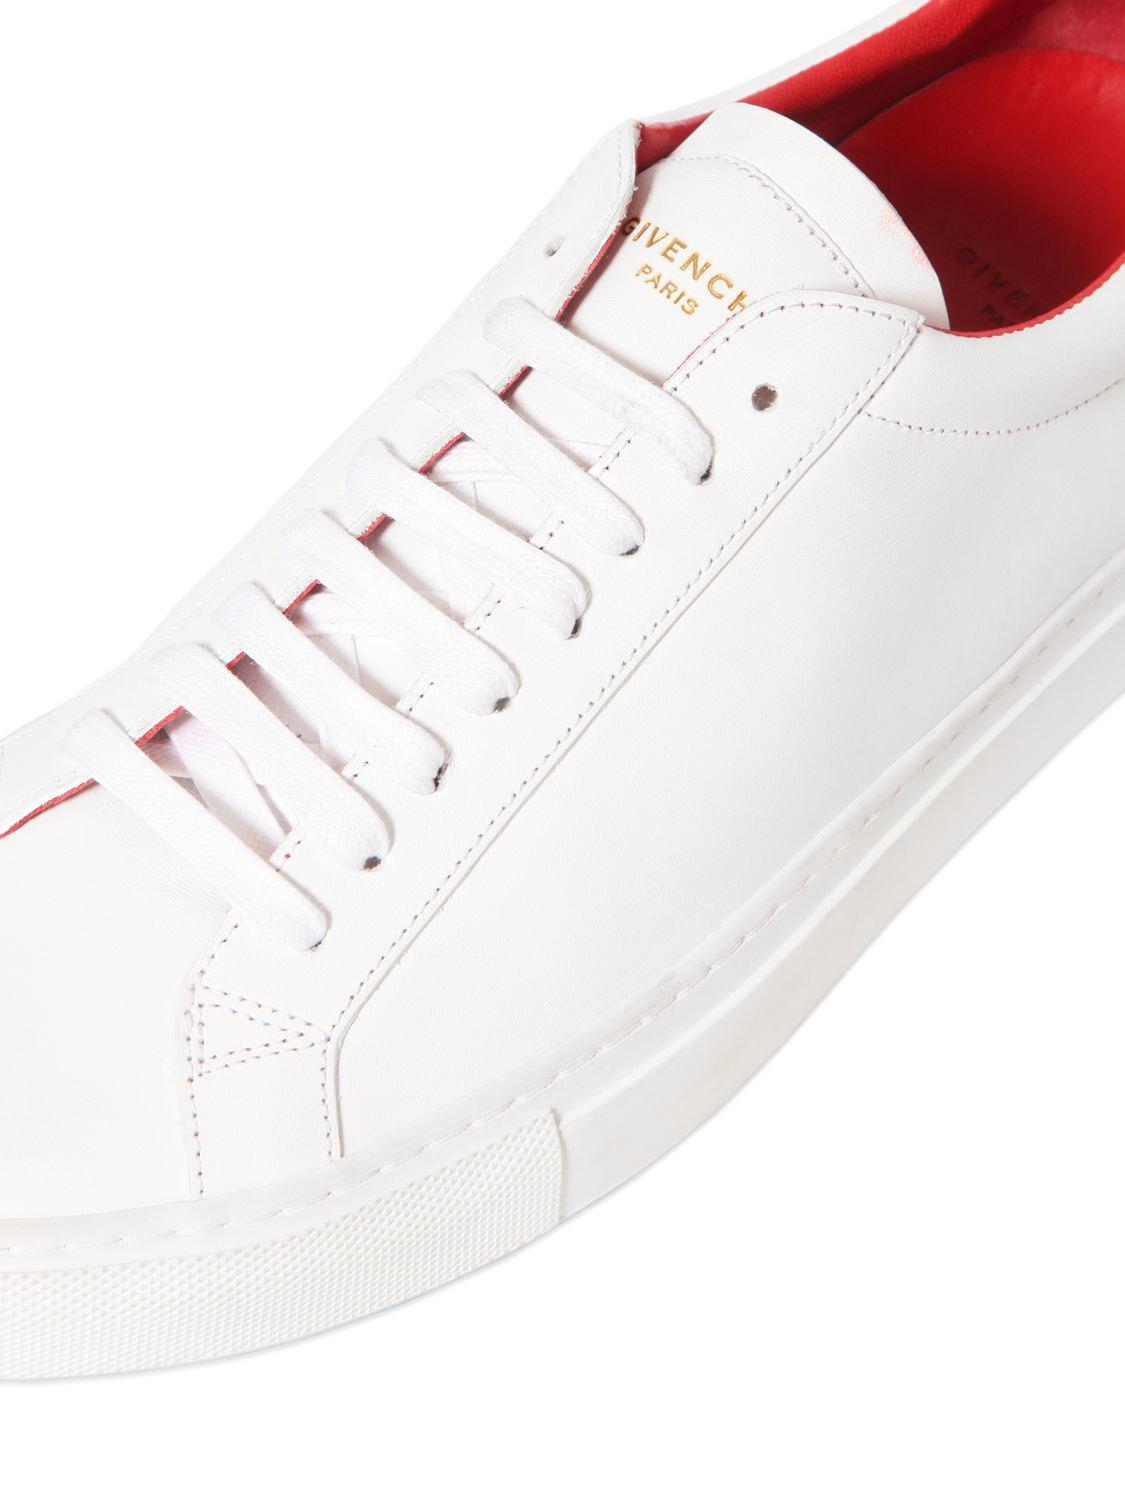 Givenchy Urban Street Leather Tennis Sneakers in White - Lyst